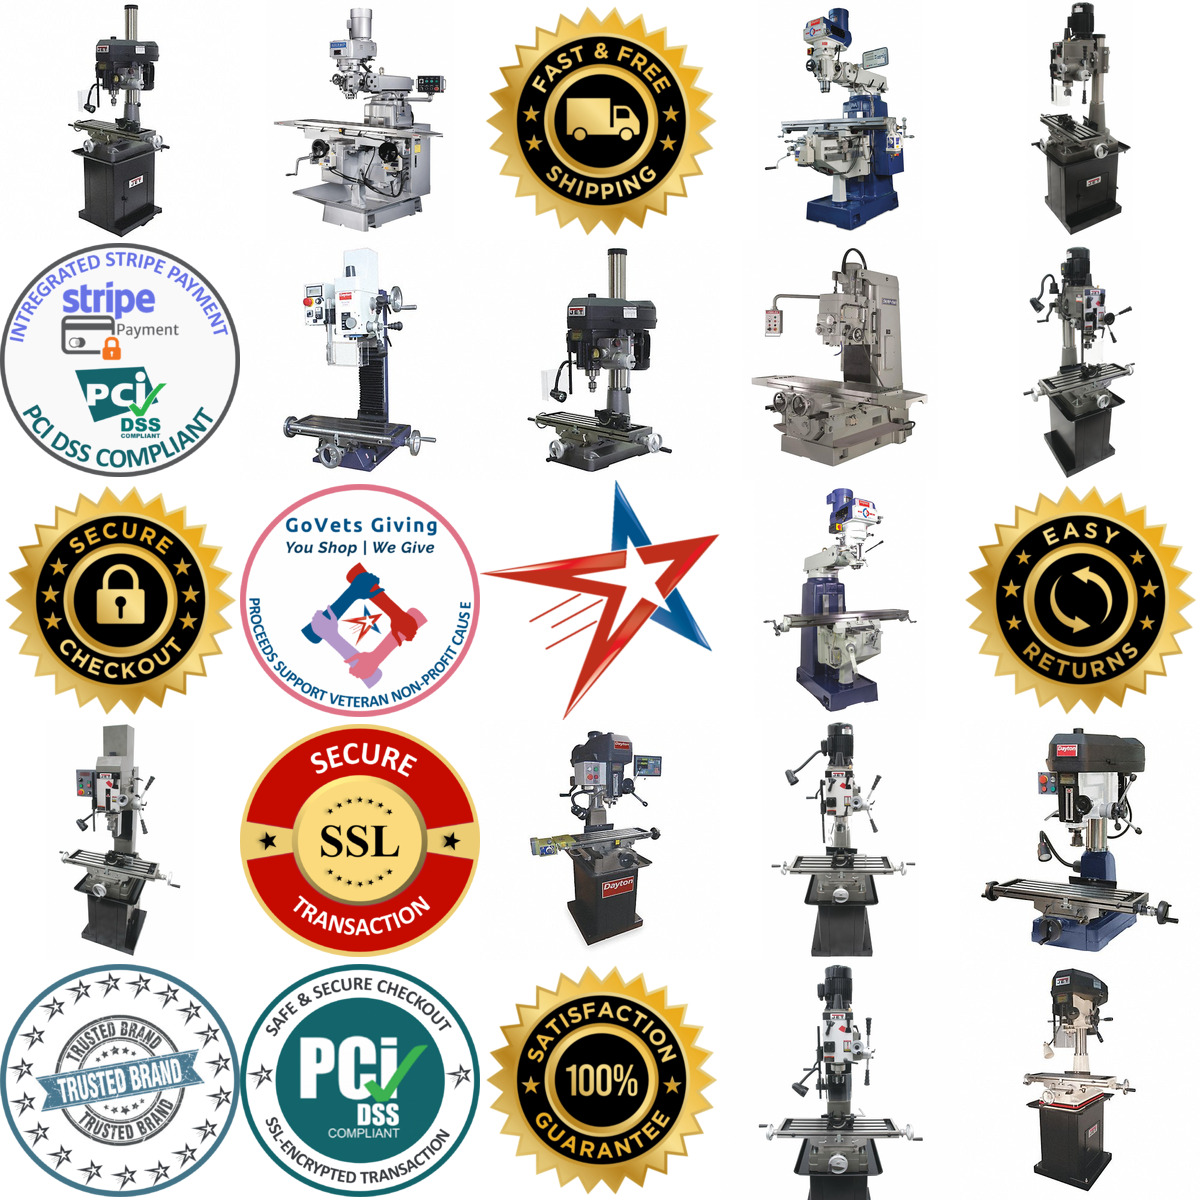 A selection of Drill and Mill Presses products on GoVets